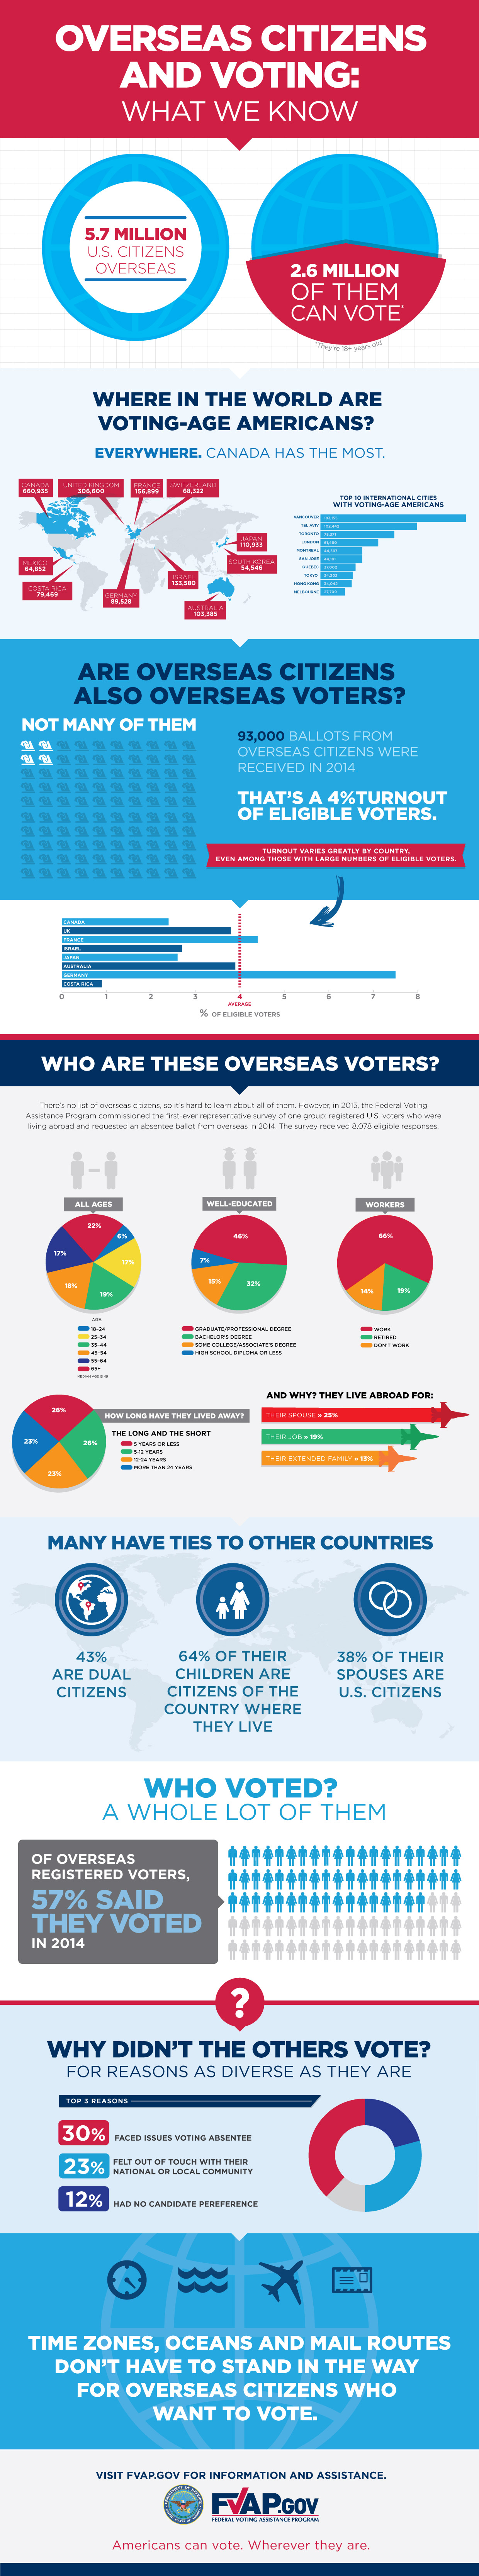 DoD Releases New Estimates and Survey of Overseas Voters